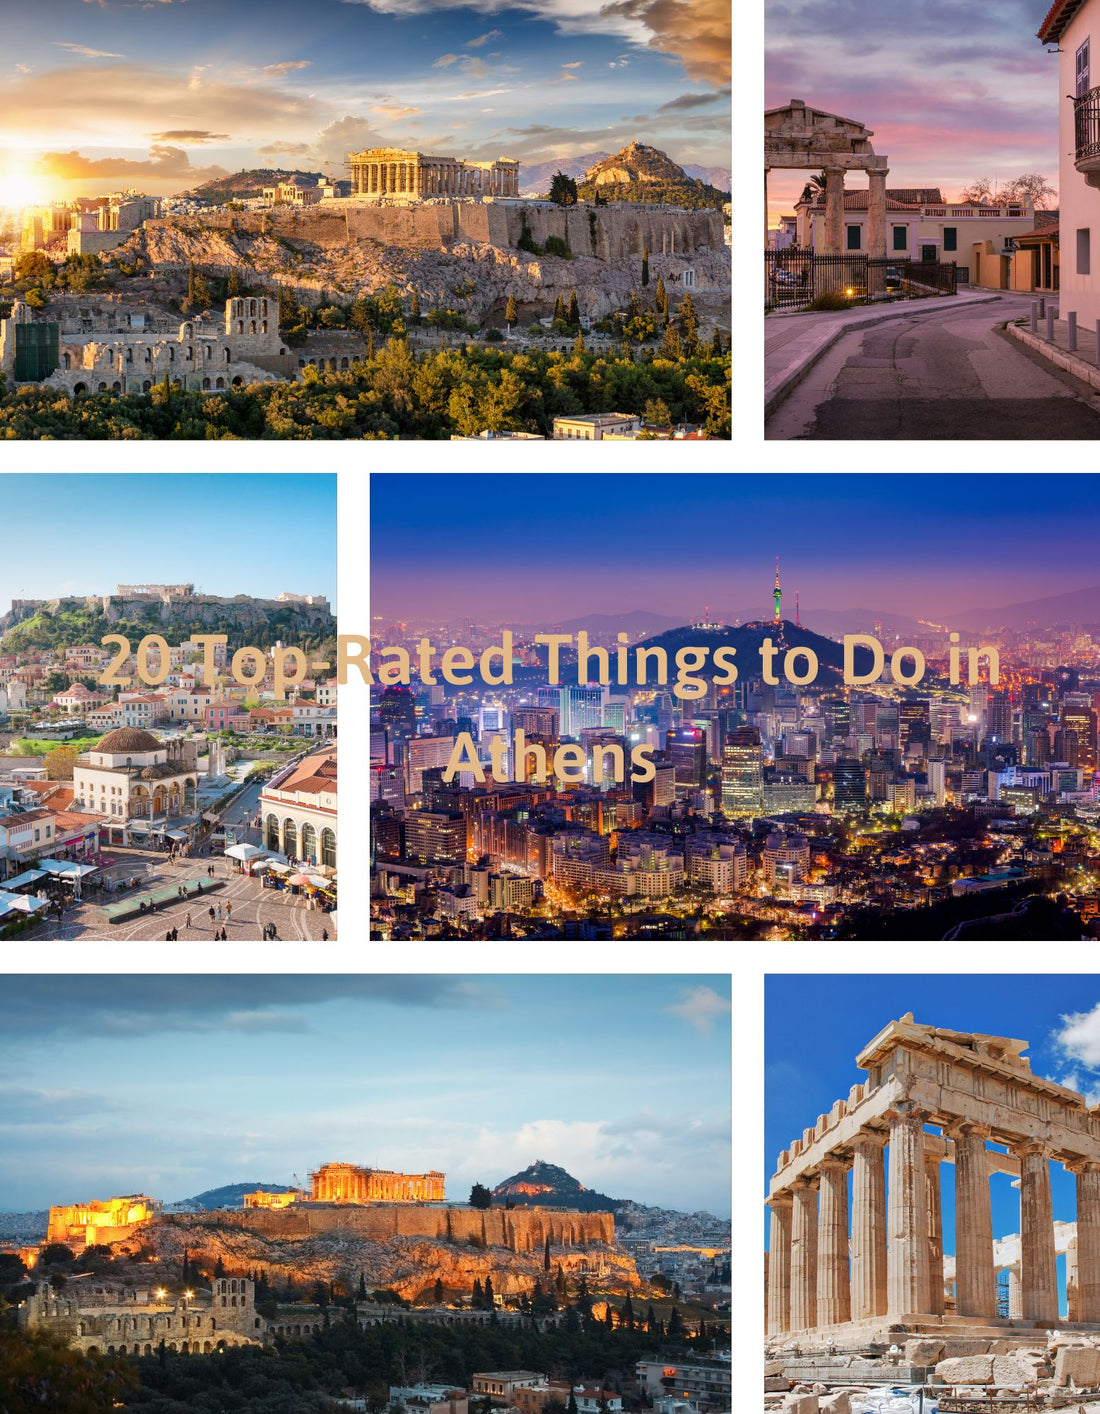 20 Top-Rated Things to Do in Athens